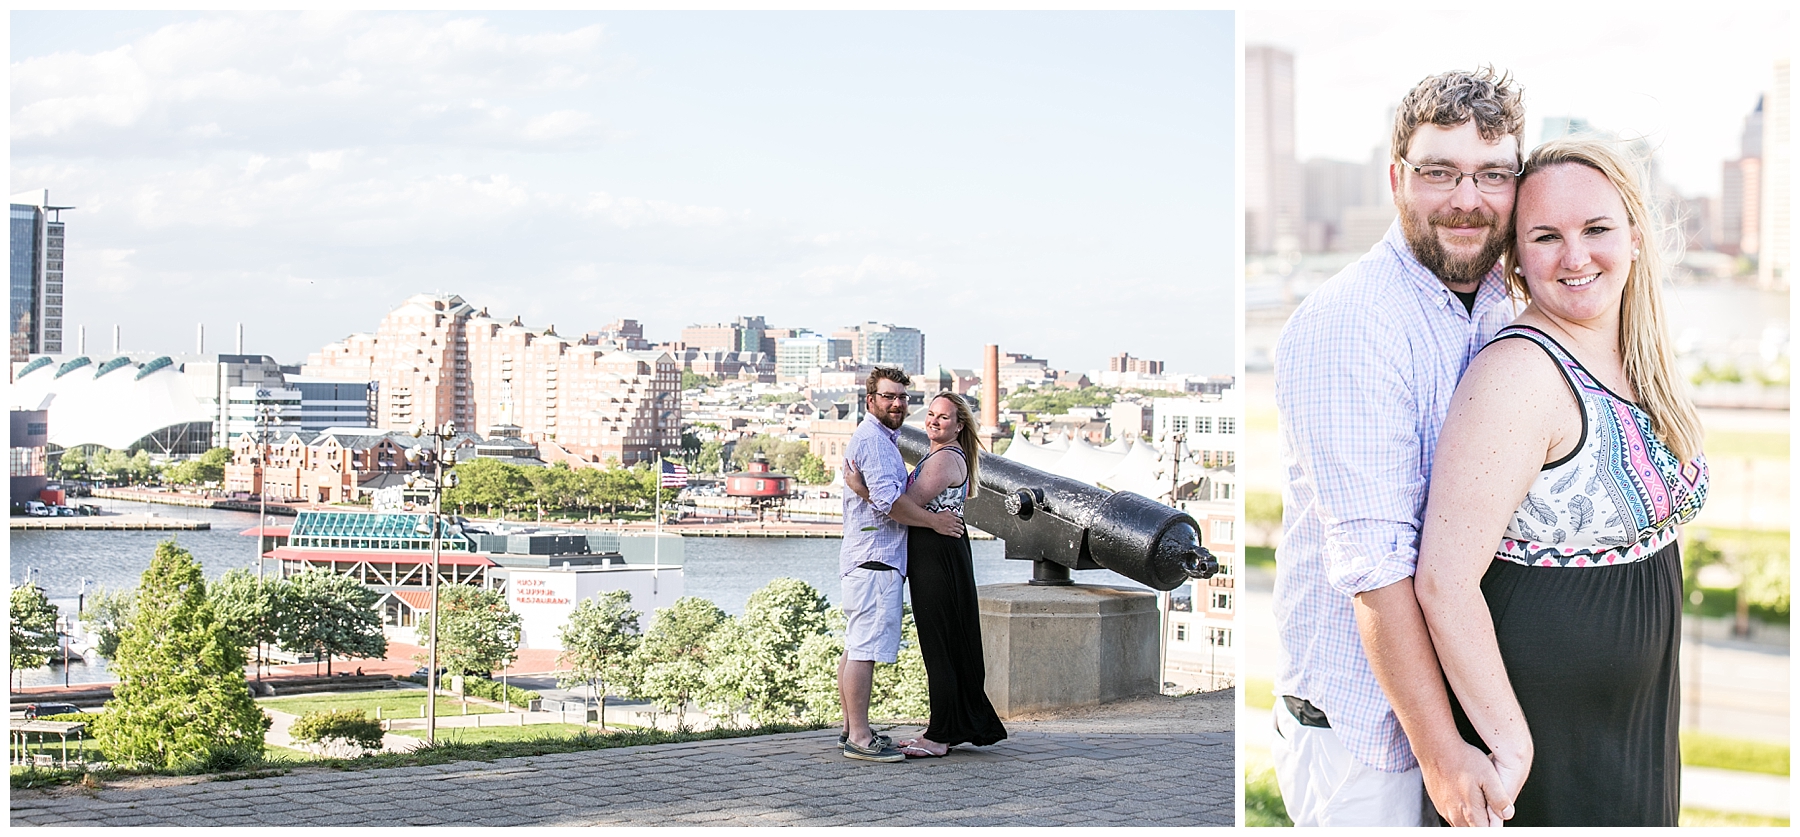 Tess Ray Camden Yards Engagement Session Living Radiant Photography photos_0040.jpg